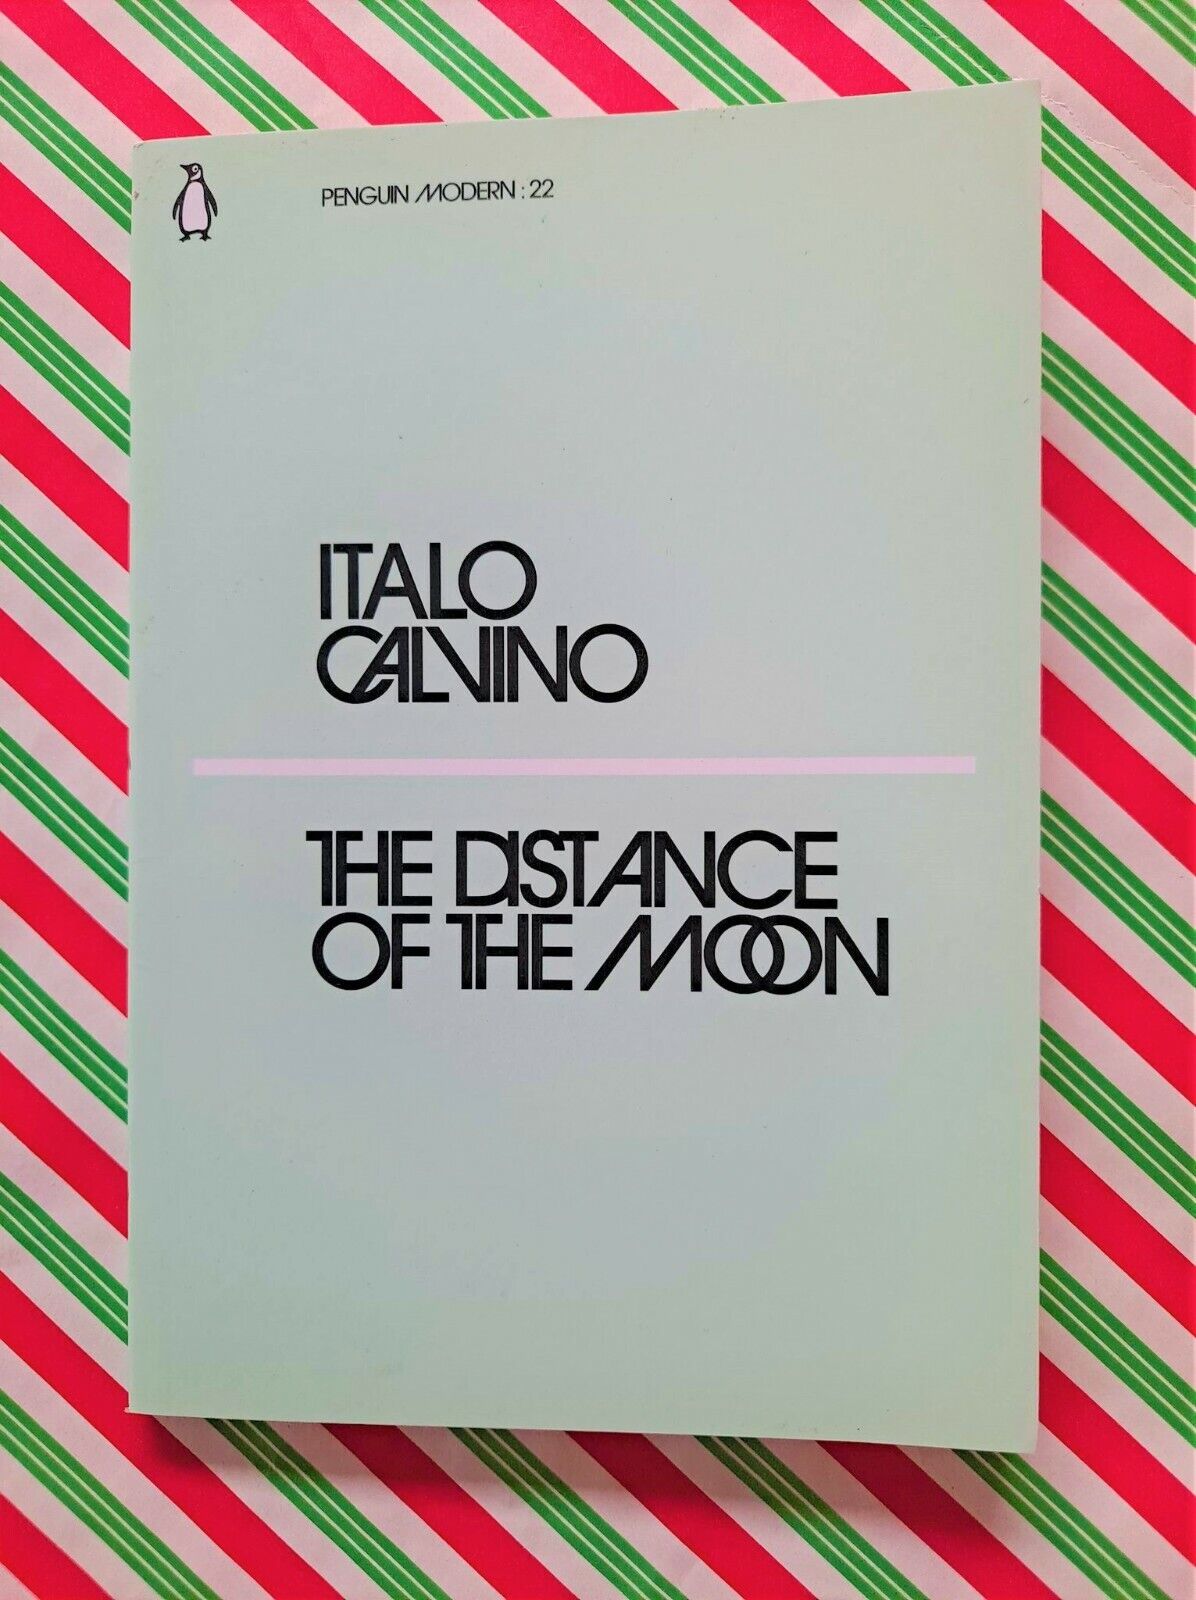 Italo Calvino - The Distance of the Moon (+ other stories) English Great cond.